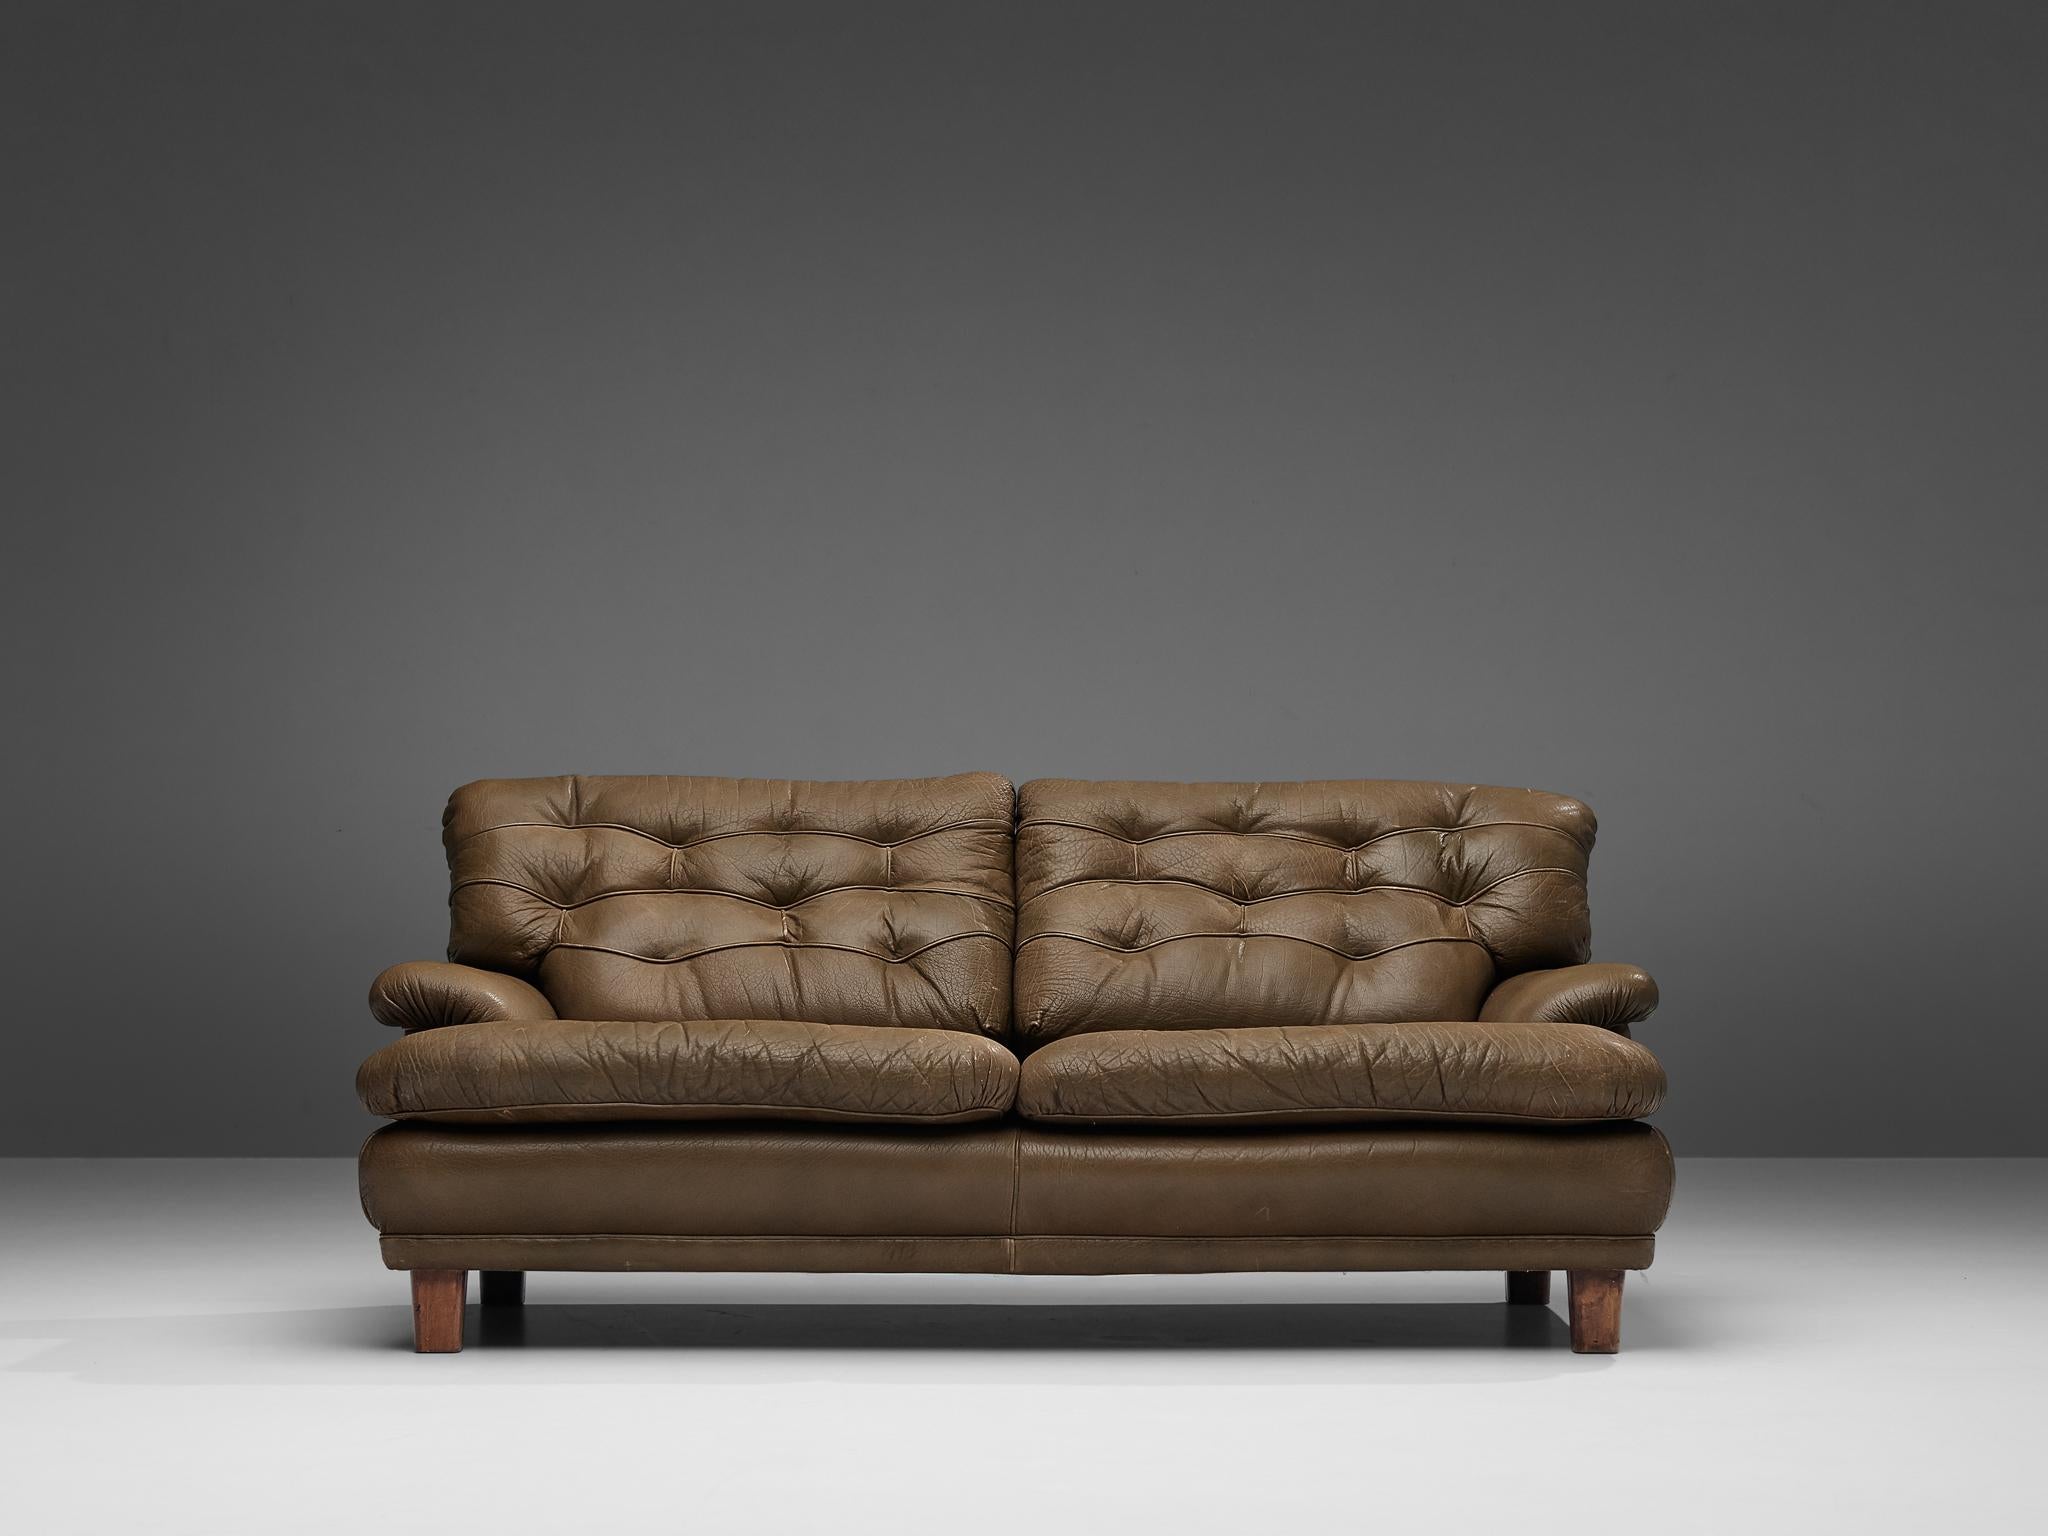 Arne Norell, sofa, leather, wood, Sweden, circa 1964.

This sofa is refined, modern and with a robust touch. A true Swedish and Norell design. It is made of leather with four cubic wooden legs. These legs provide a balanced base to the solid